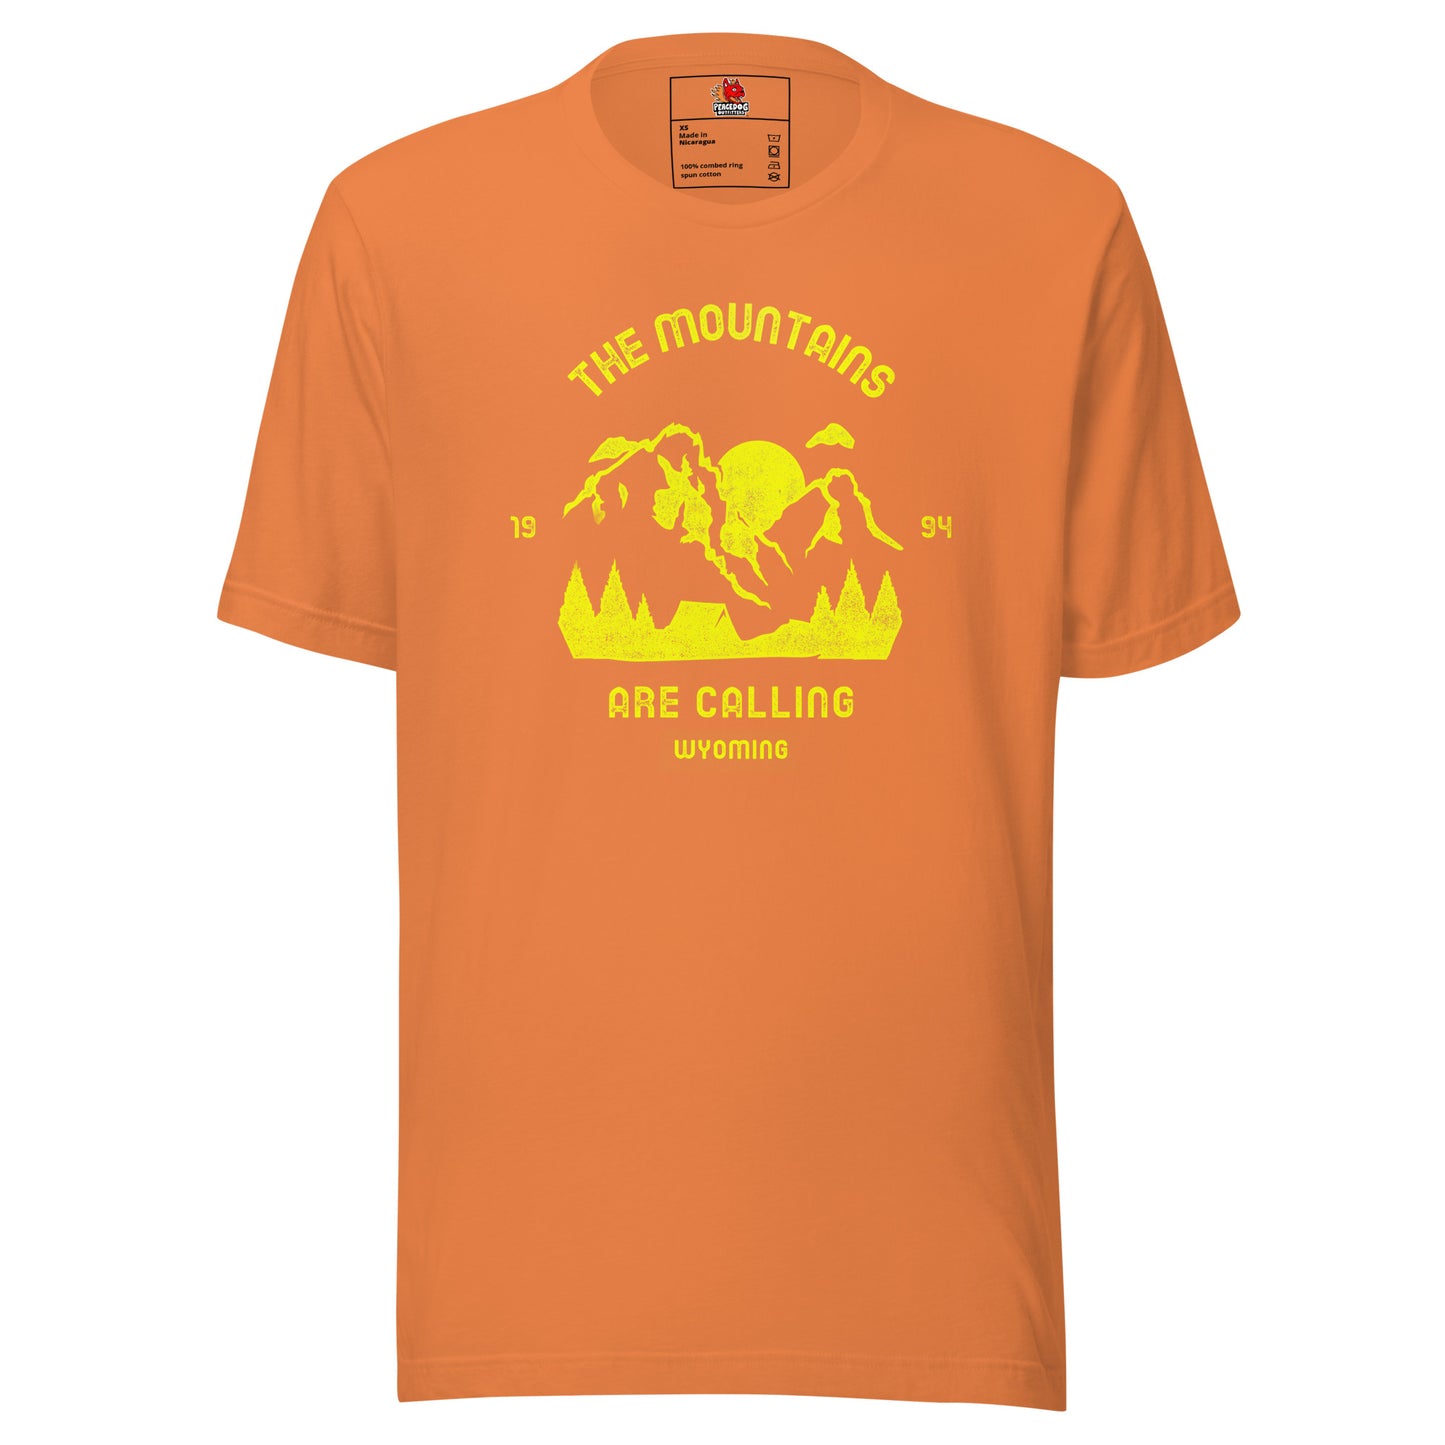 The Mountains are Calling - WYOMING T-shirt